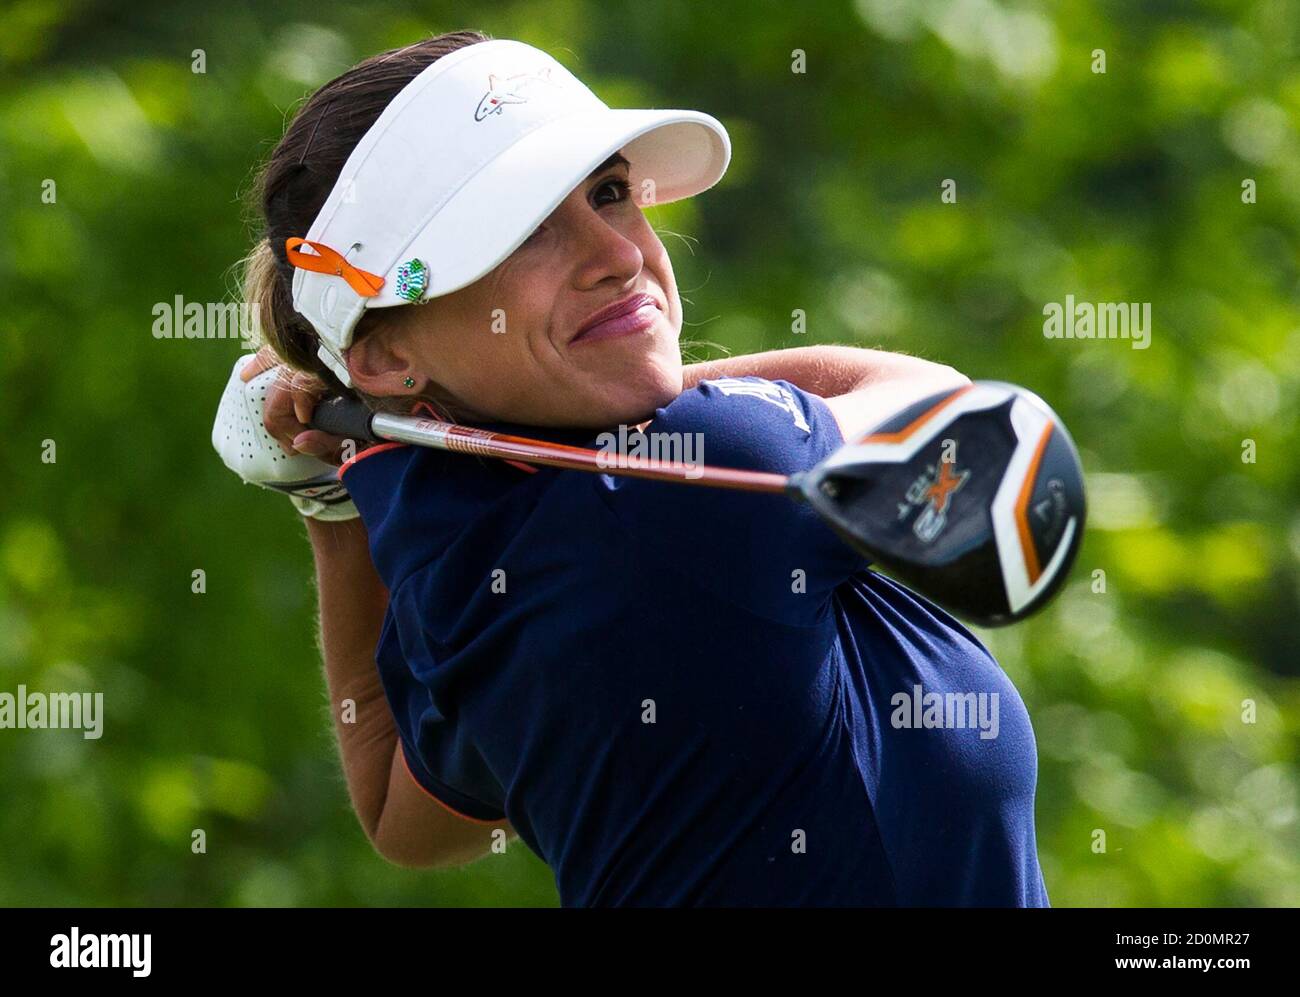 Belen Mozo of Spain tees off the eighth hole during the second round of the Manulife Financial LPGA Classic women's golf tournament at the Grey Silo course in Waterloo, June 6, 2014.    REUTERS/Mark Blinch (CANADA - Tags: SPORT GOLF) Stock Photo